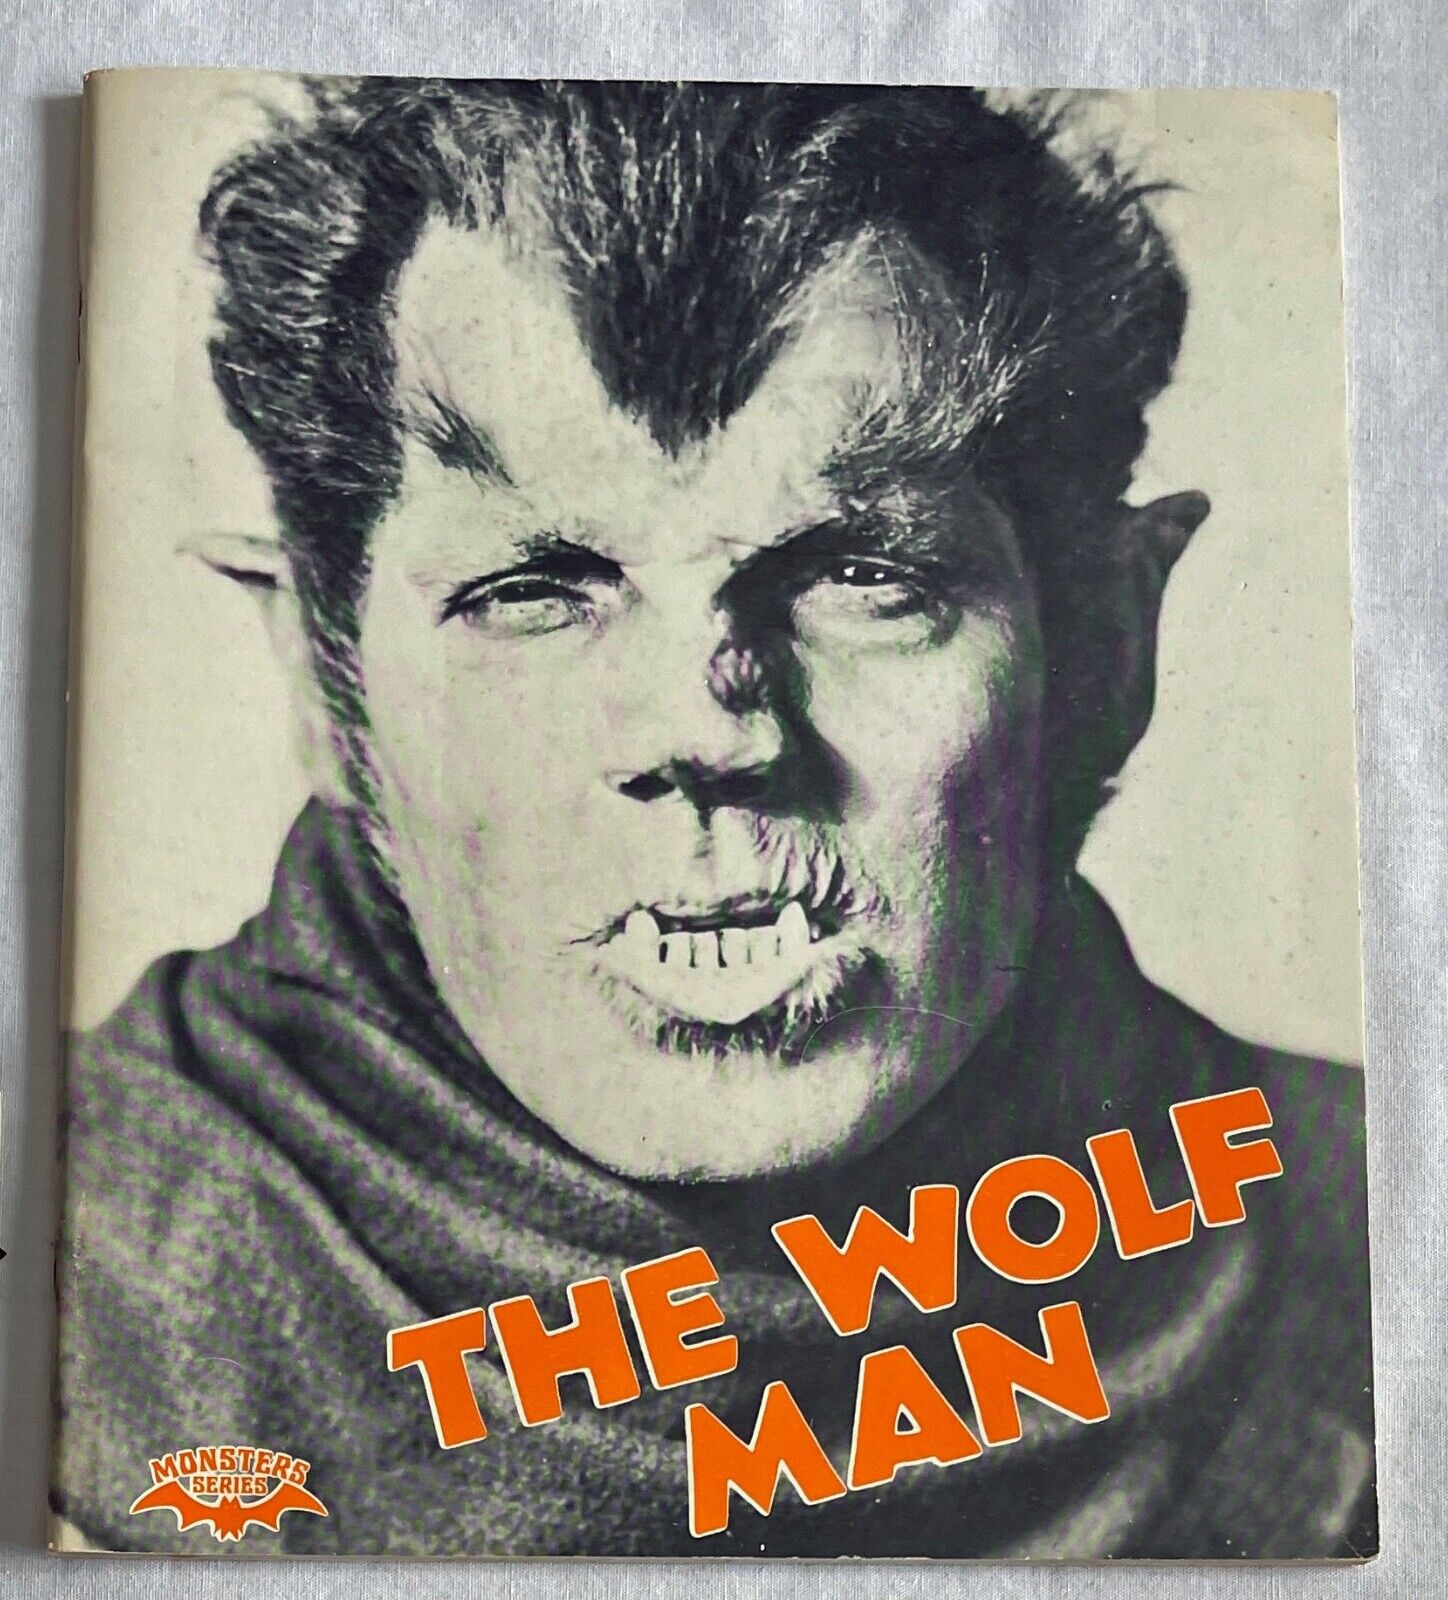 THE WOLF MAN MONSTERS SERIES IAN THORNE CRESTWOOD HOUSE PAPERBACK 1978